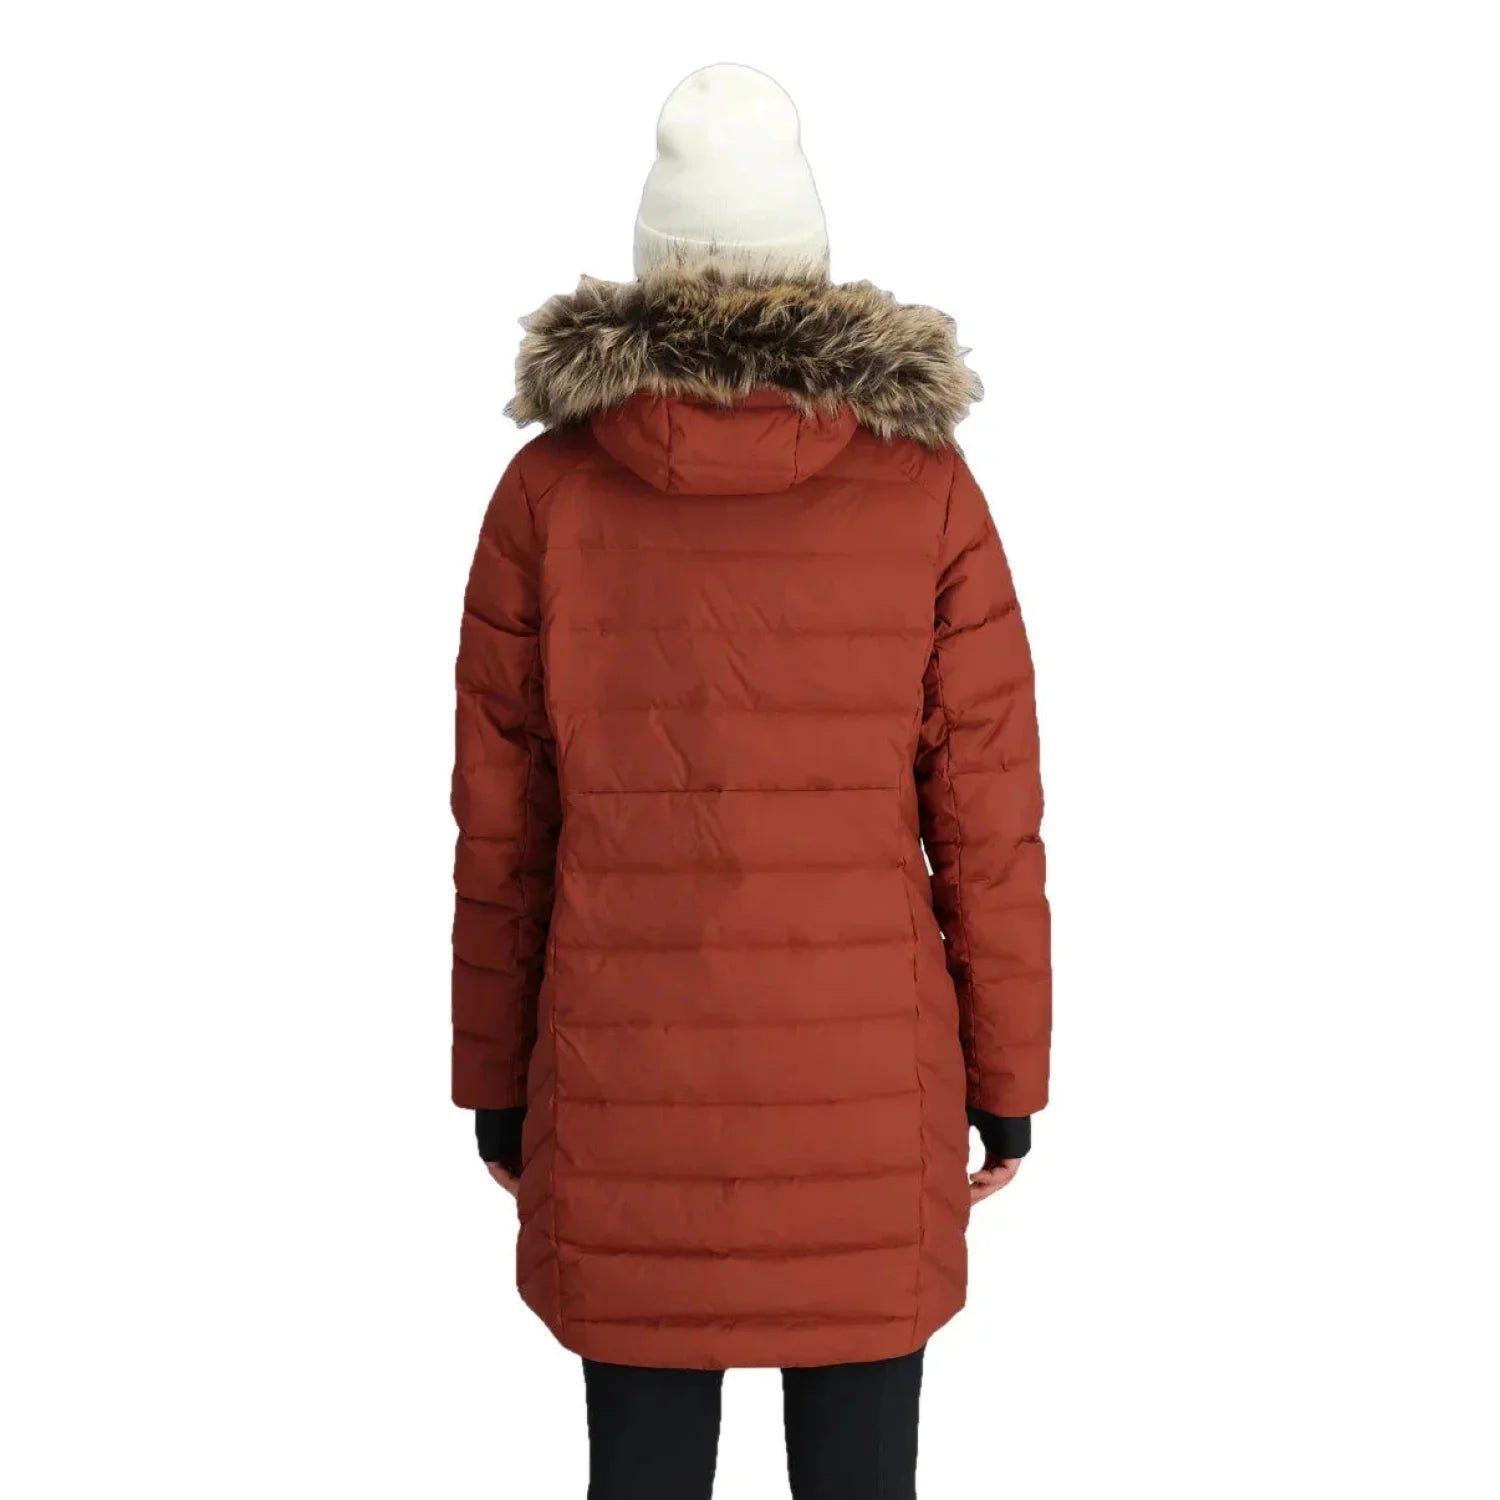 Outdoor Research Women's Coze Lux Down Parka in Brick. A mid-length puffer jacket in a dark orange with a faux fur collar. Back View.